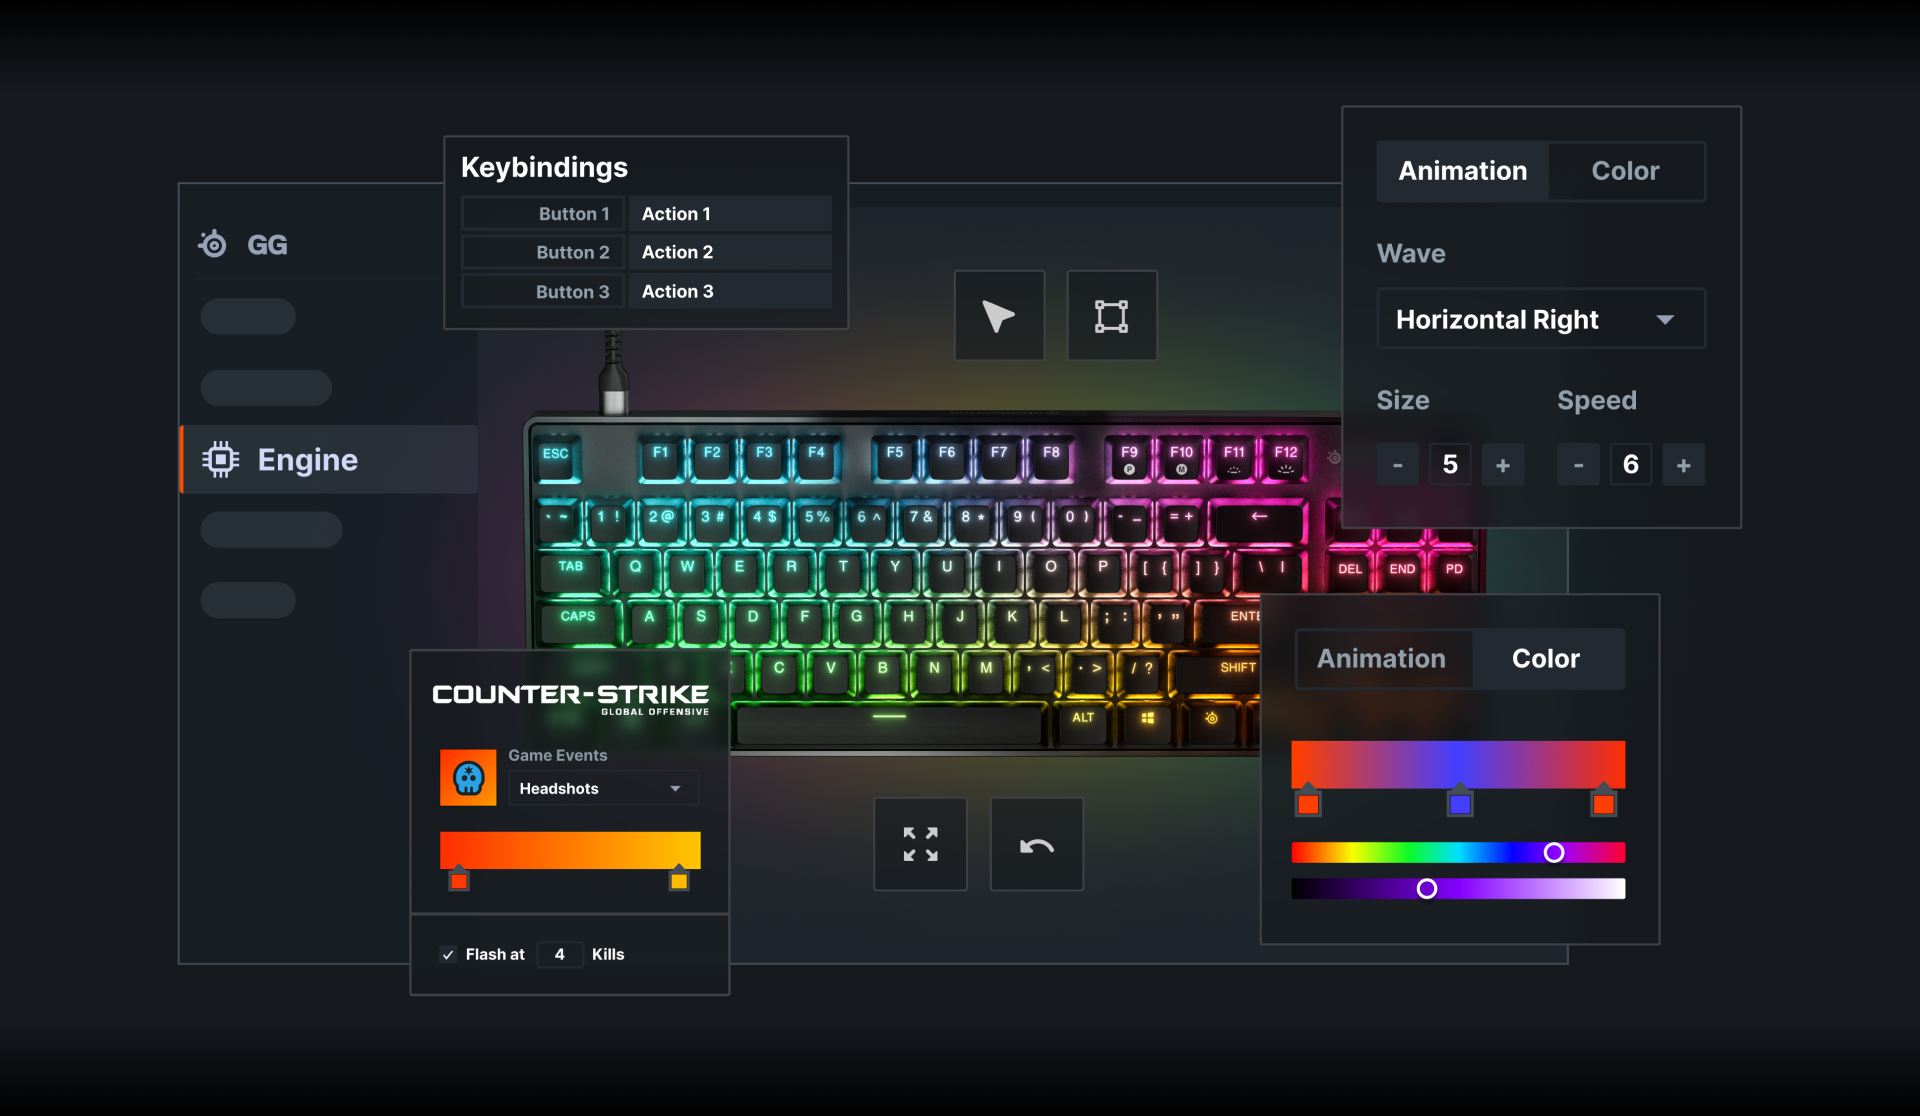 A user interface mockup of SteelSeries GG software showing the customization capabilities of the keyboard.